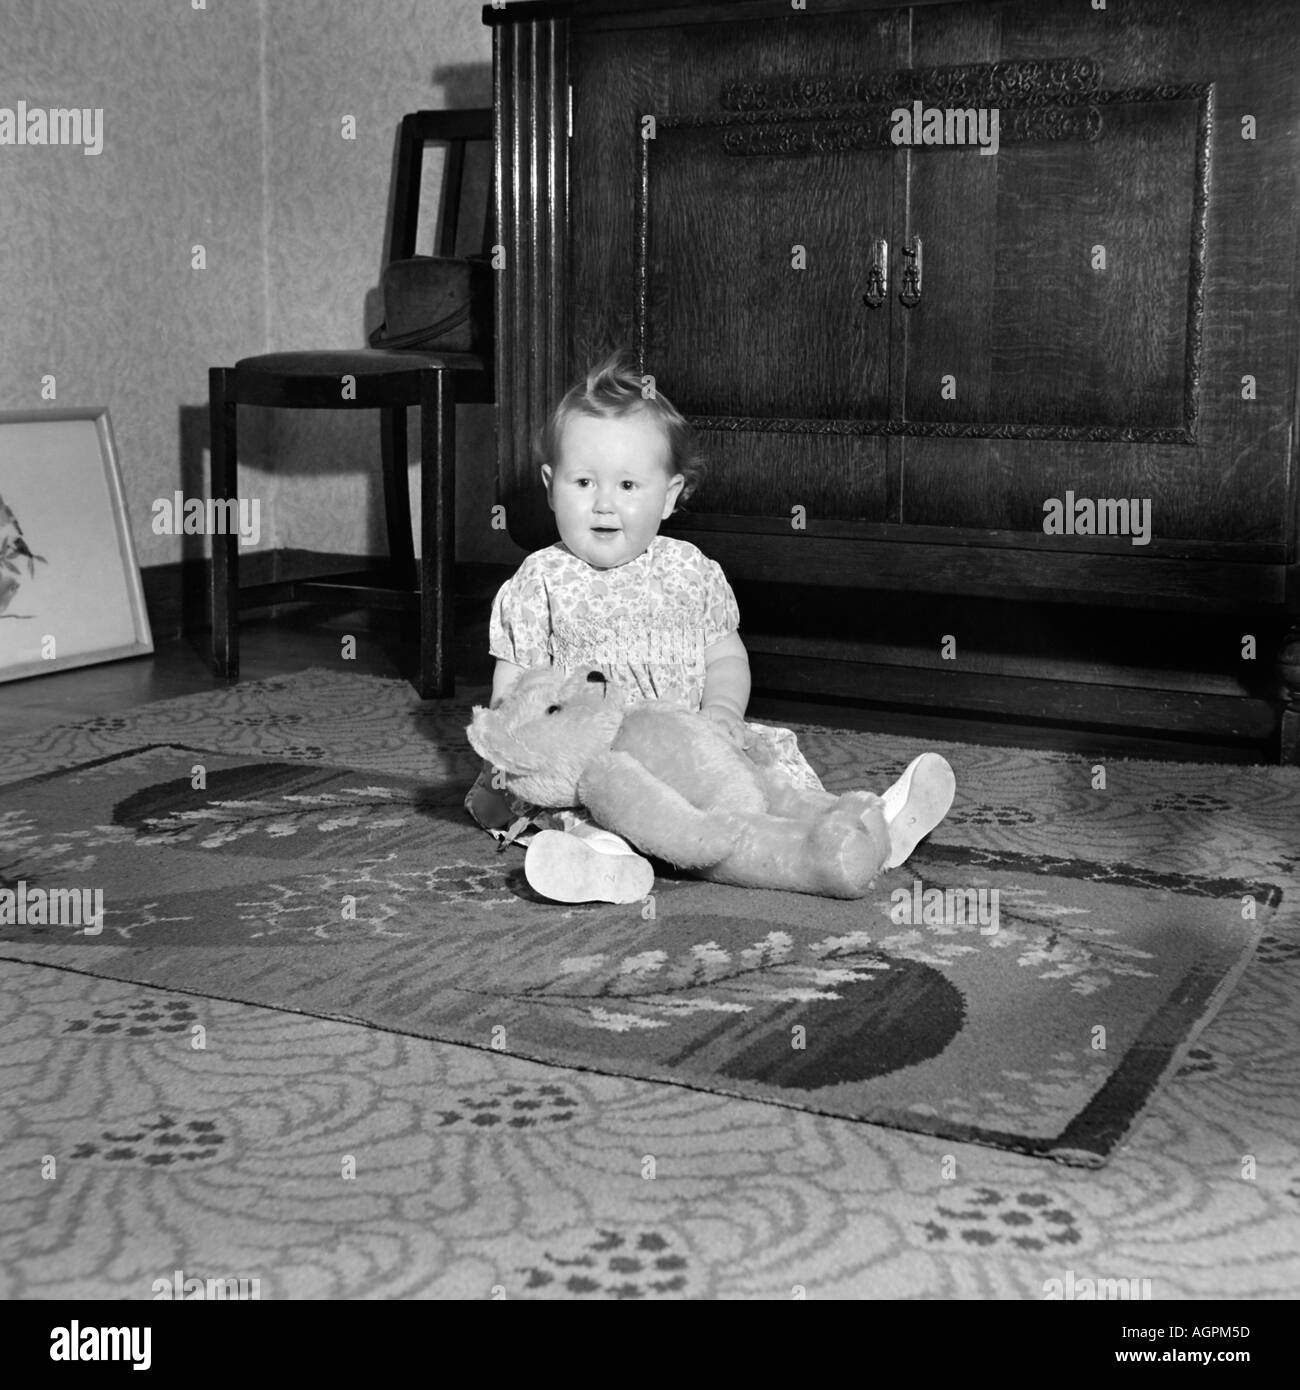 OLD VINTAGE SNAPSHOT FAMILLE PHOTOGRAPHIE DE BABY GIRL PLAYING WITH TEDDY BEAR SUR TAPIS DE SALON Banque D'Images